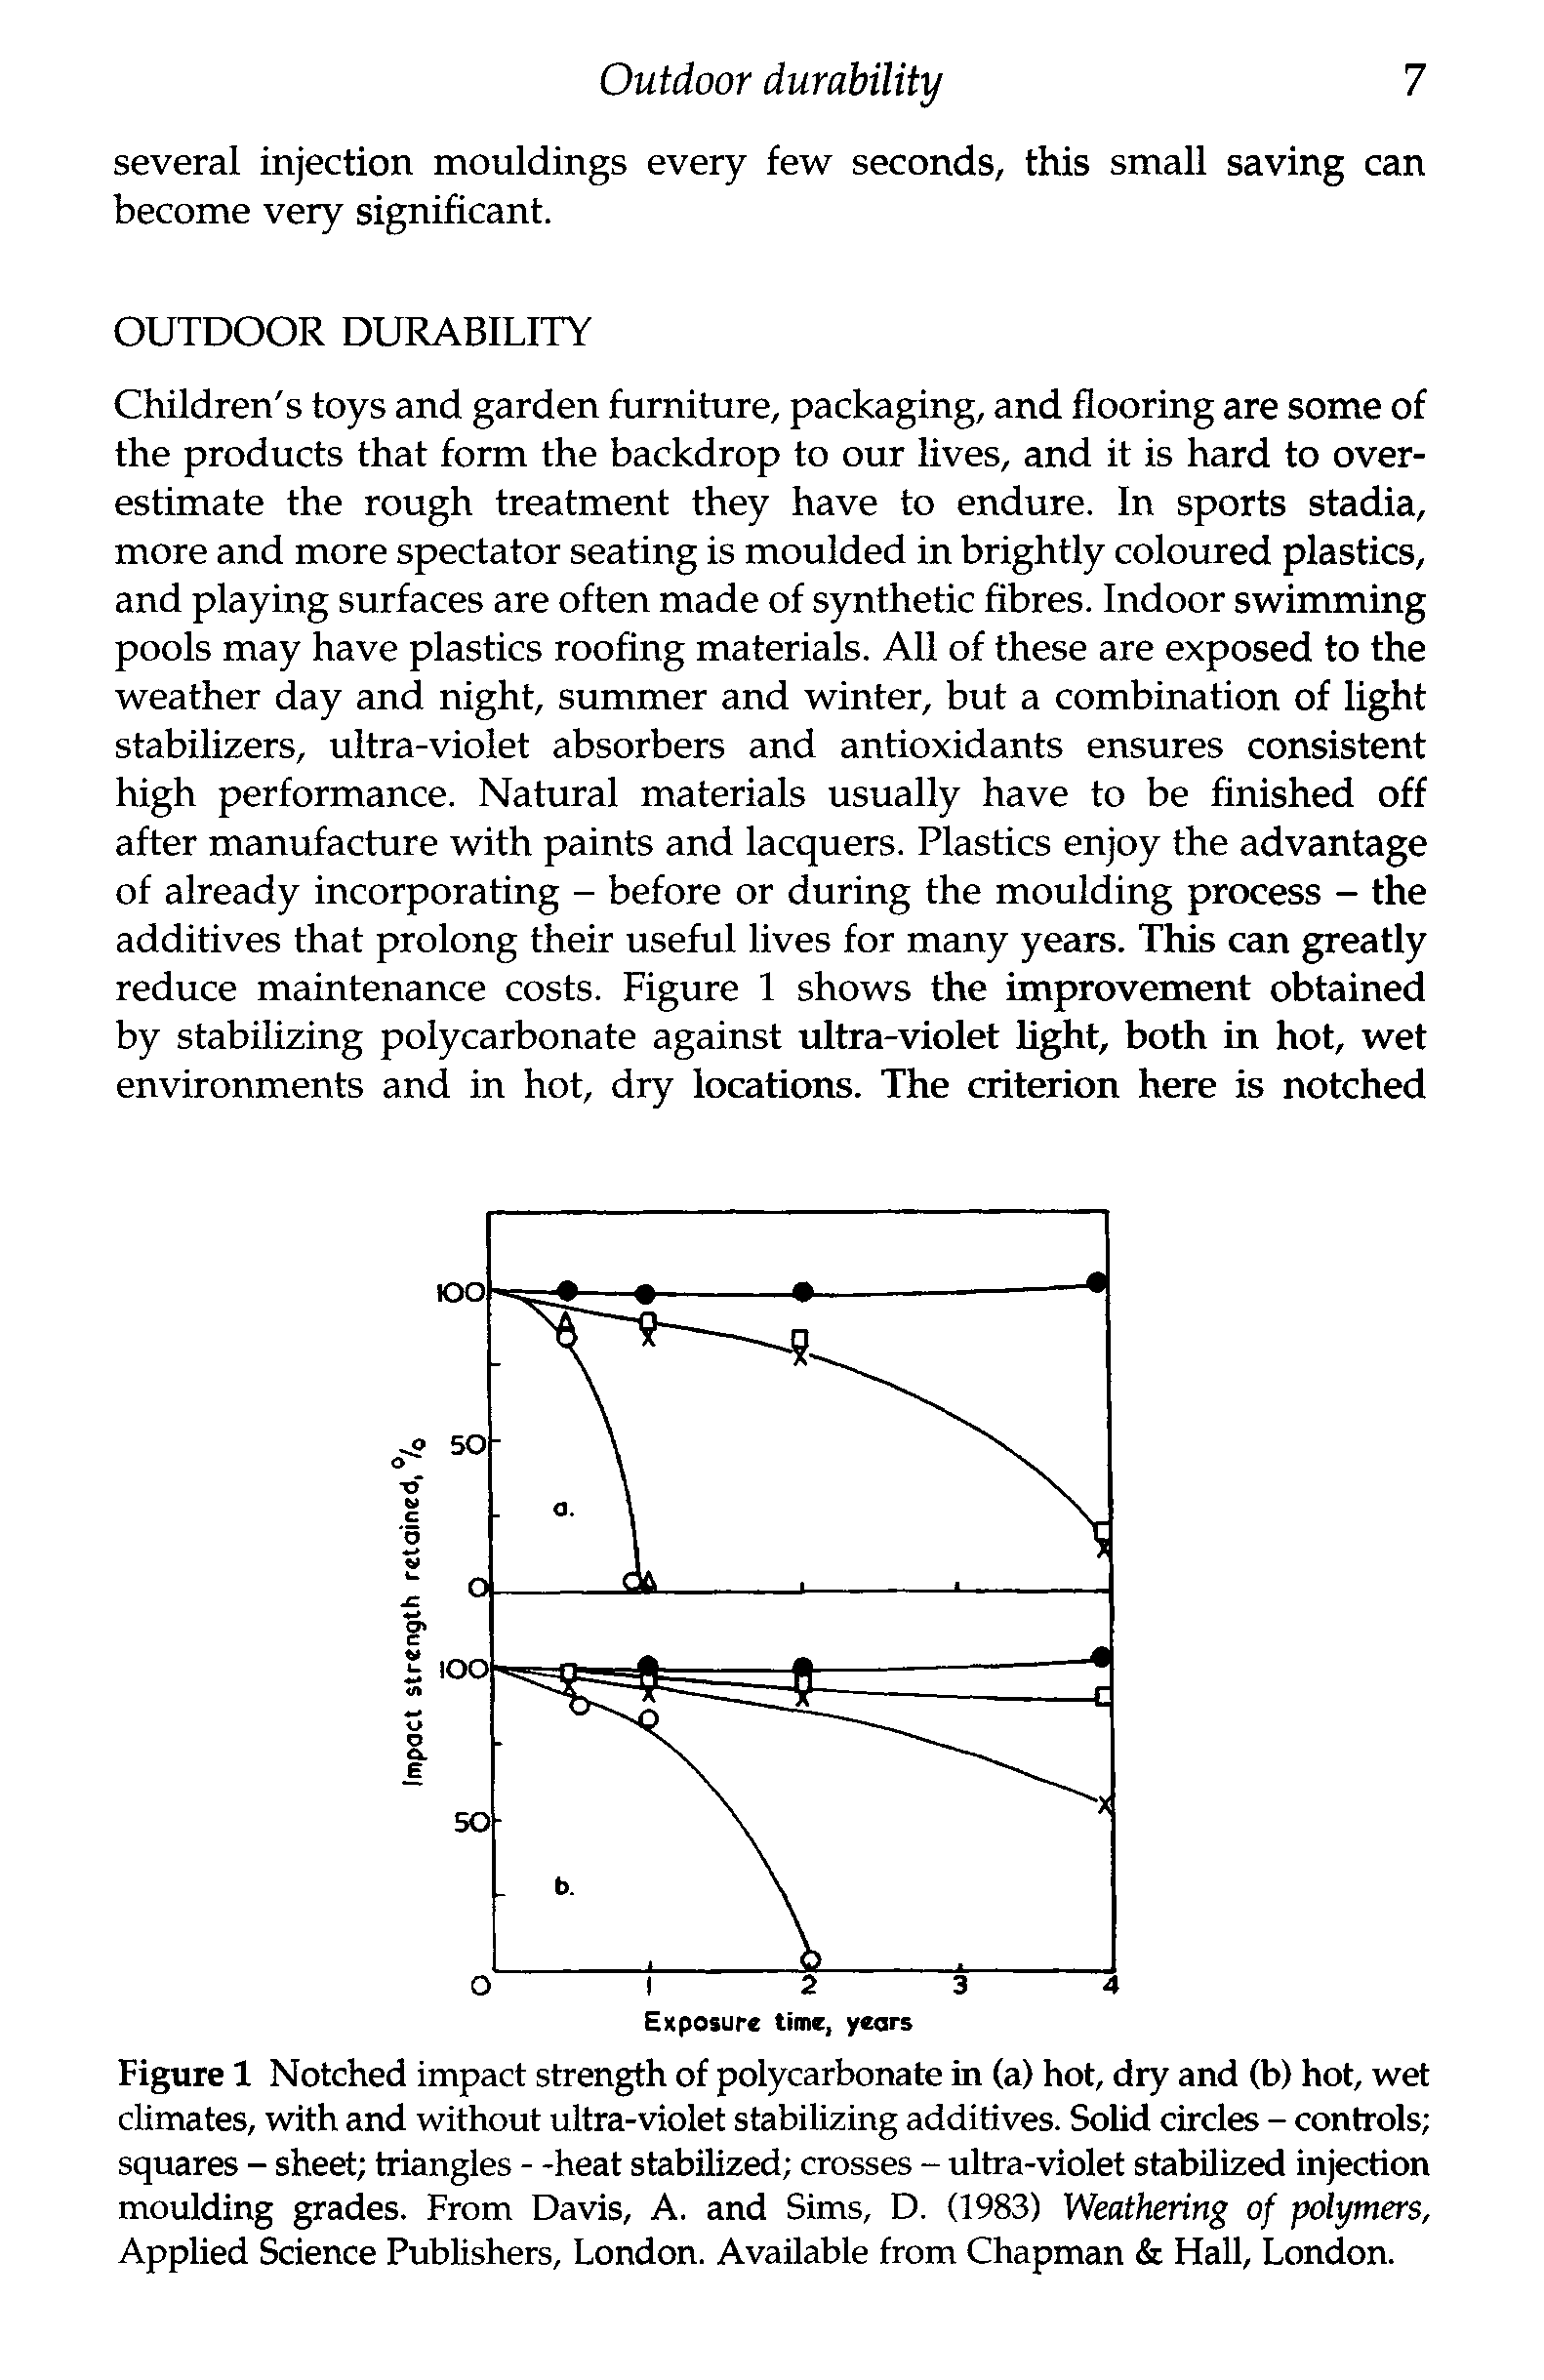 Figure 1 Notched impact strength of polycarbonate in (a) hot, dry and (b) hot, wet climates, with and without ultra-violet stabilizing additives. Solid circles - controls squares - sheet triangles - -heat stabilized crosses - ultra-violet stabilized injection moulding grades. From Davis, A. and Sims, D. (1983) Weathering of polymers. Applied Science Publishers, London. Available from Chapman Hall, London.